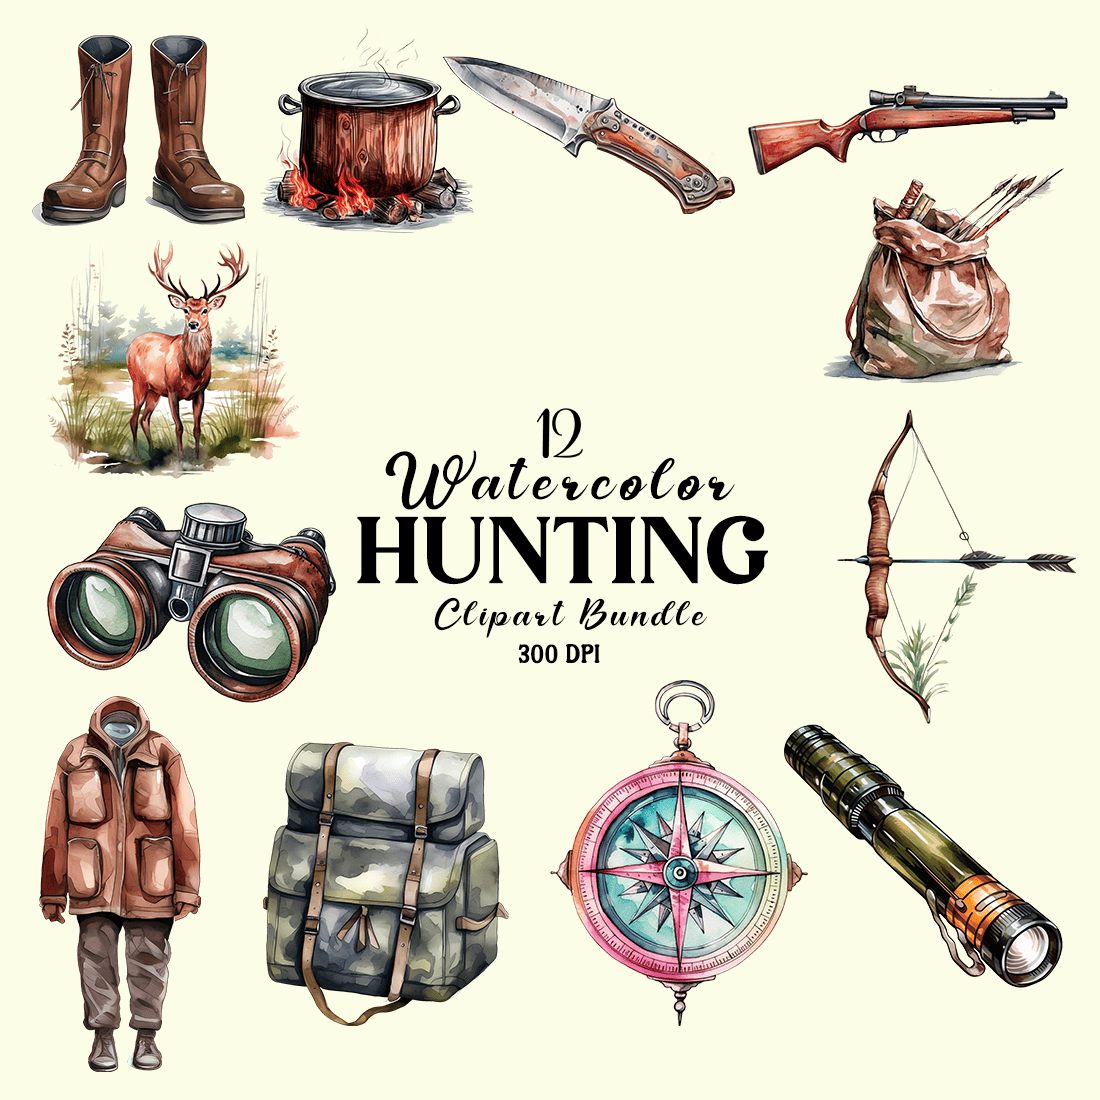 Watercolor Hunting Clipart Bundle cover image.